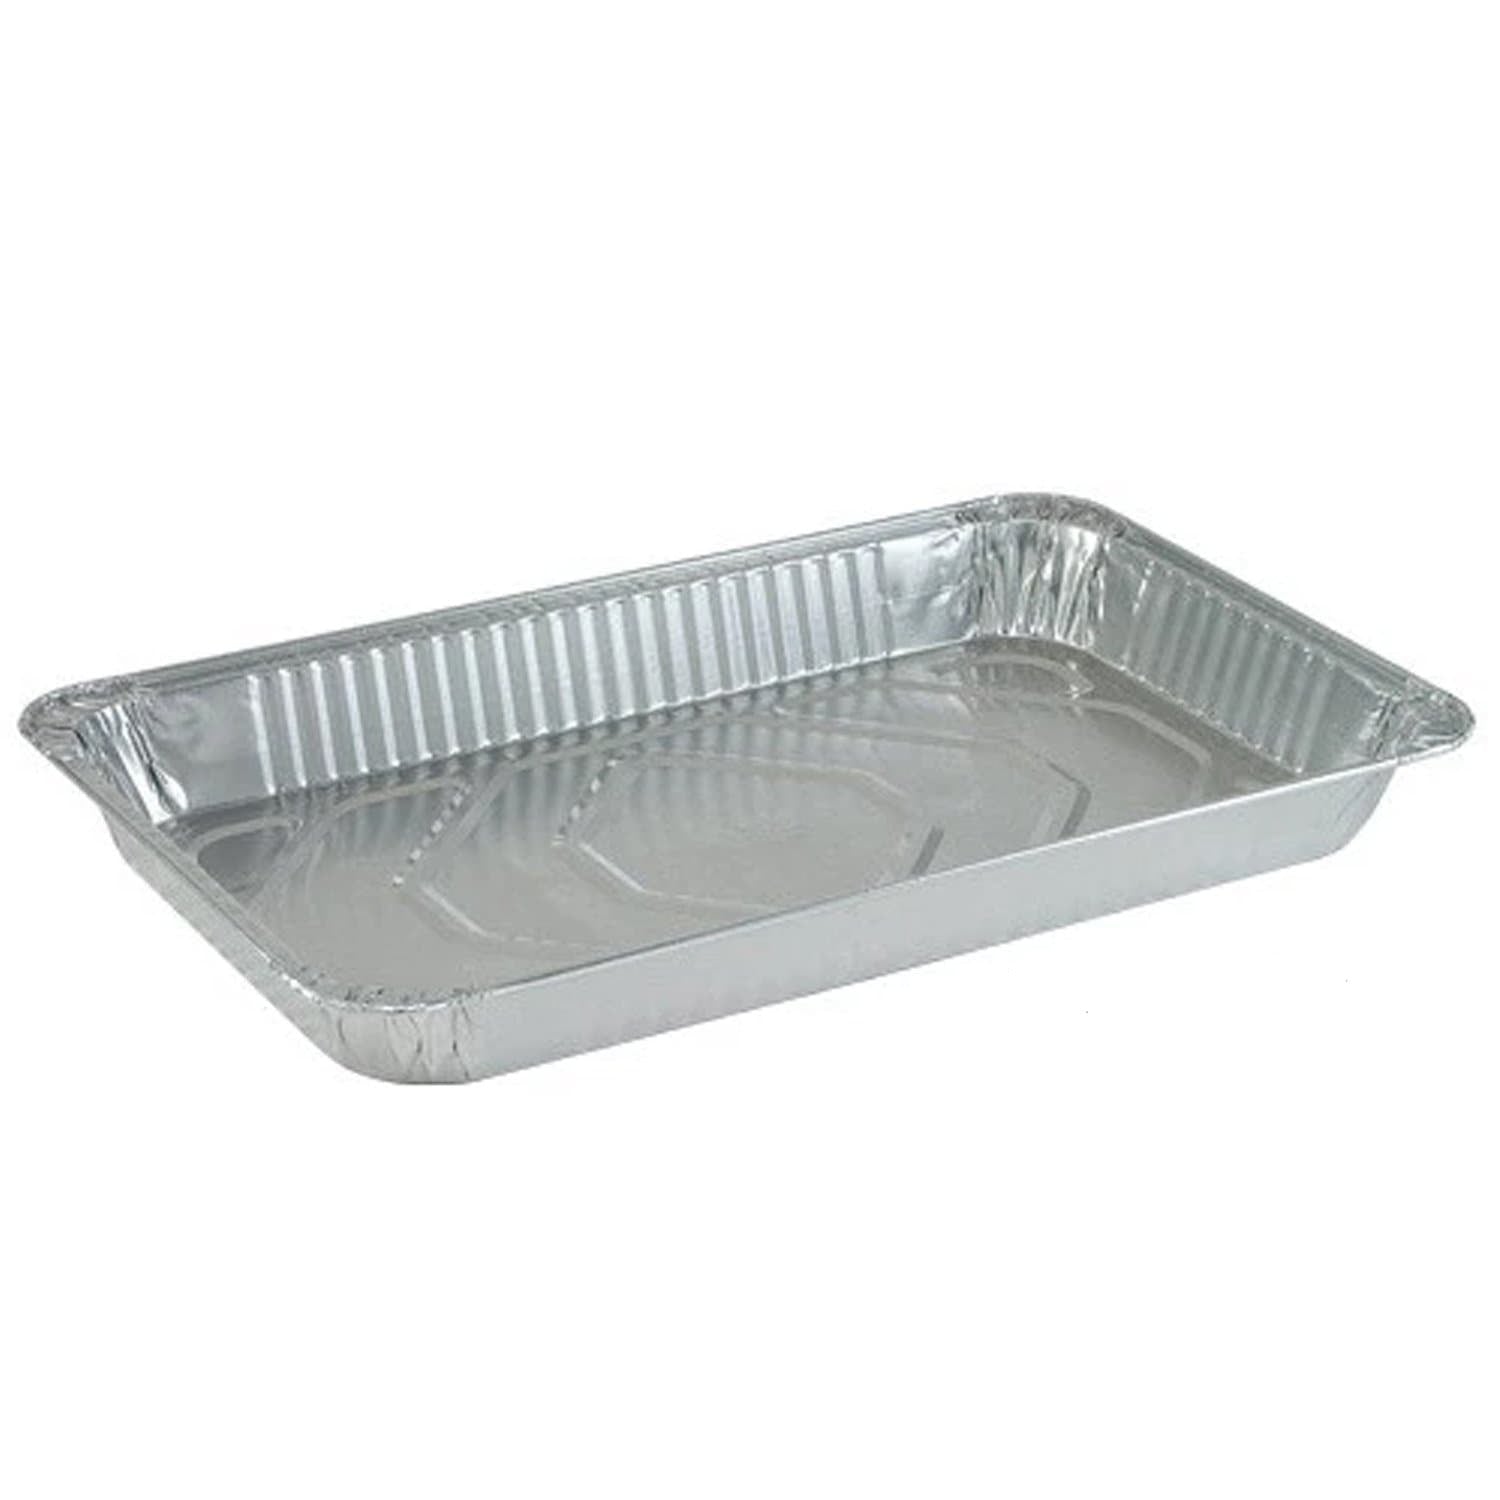 Nicole Home Collection 00518 Aluminum Full Size Medium Pan Pack of 50